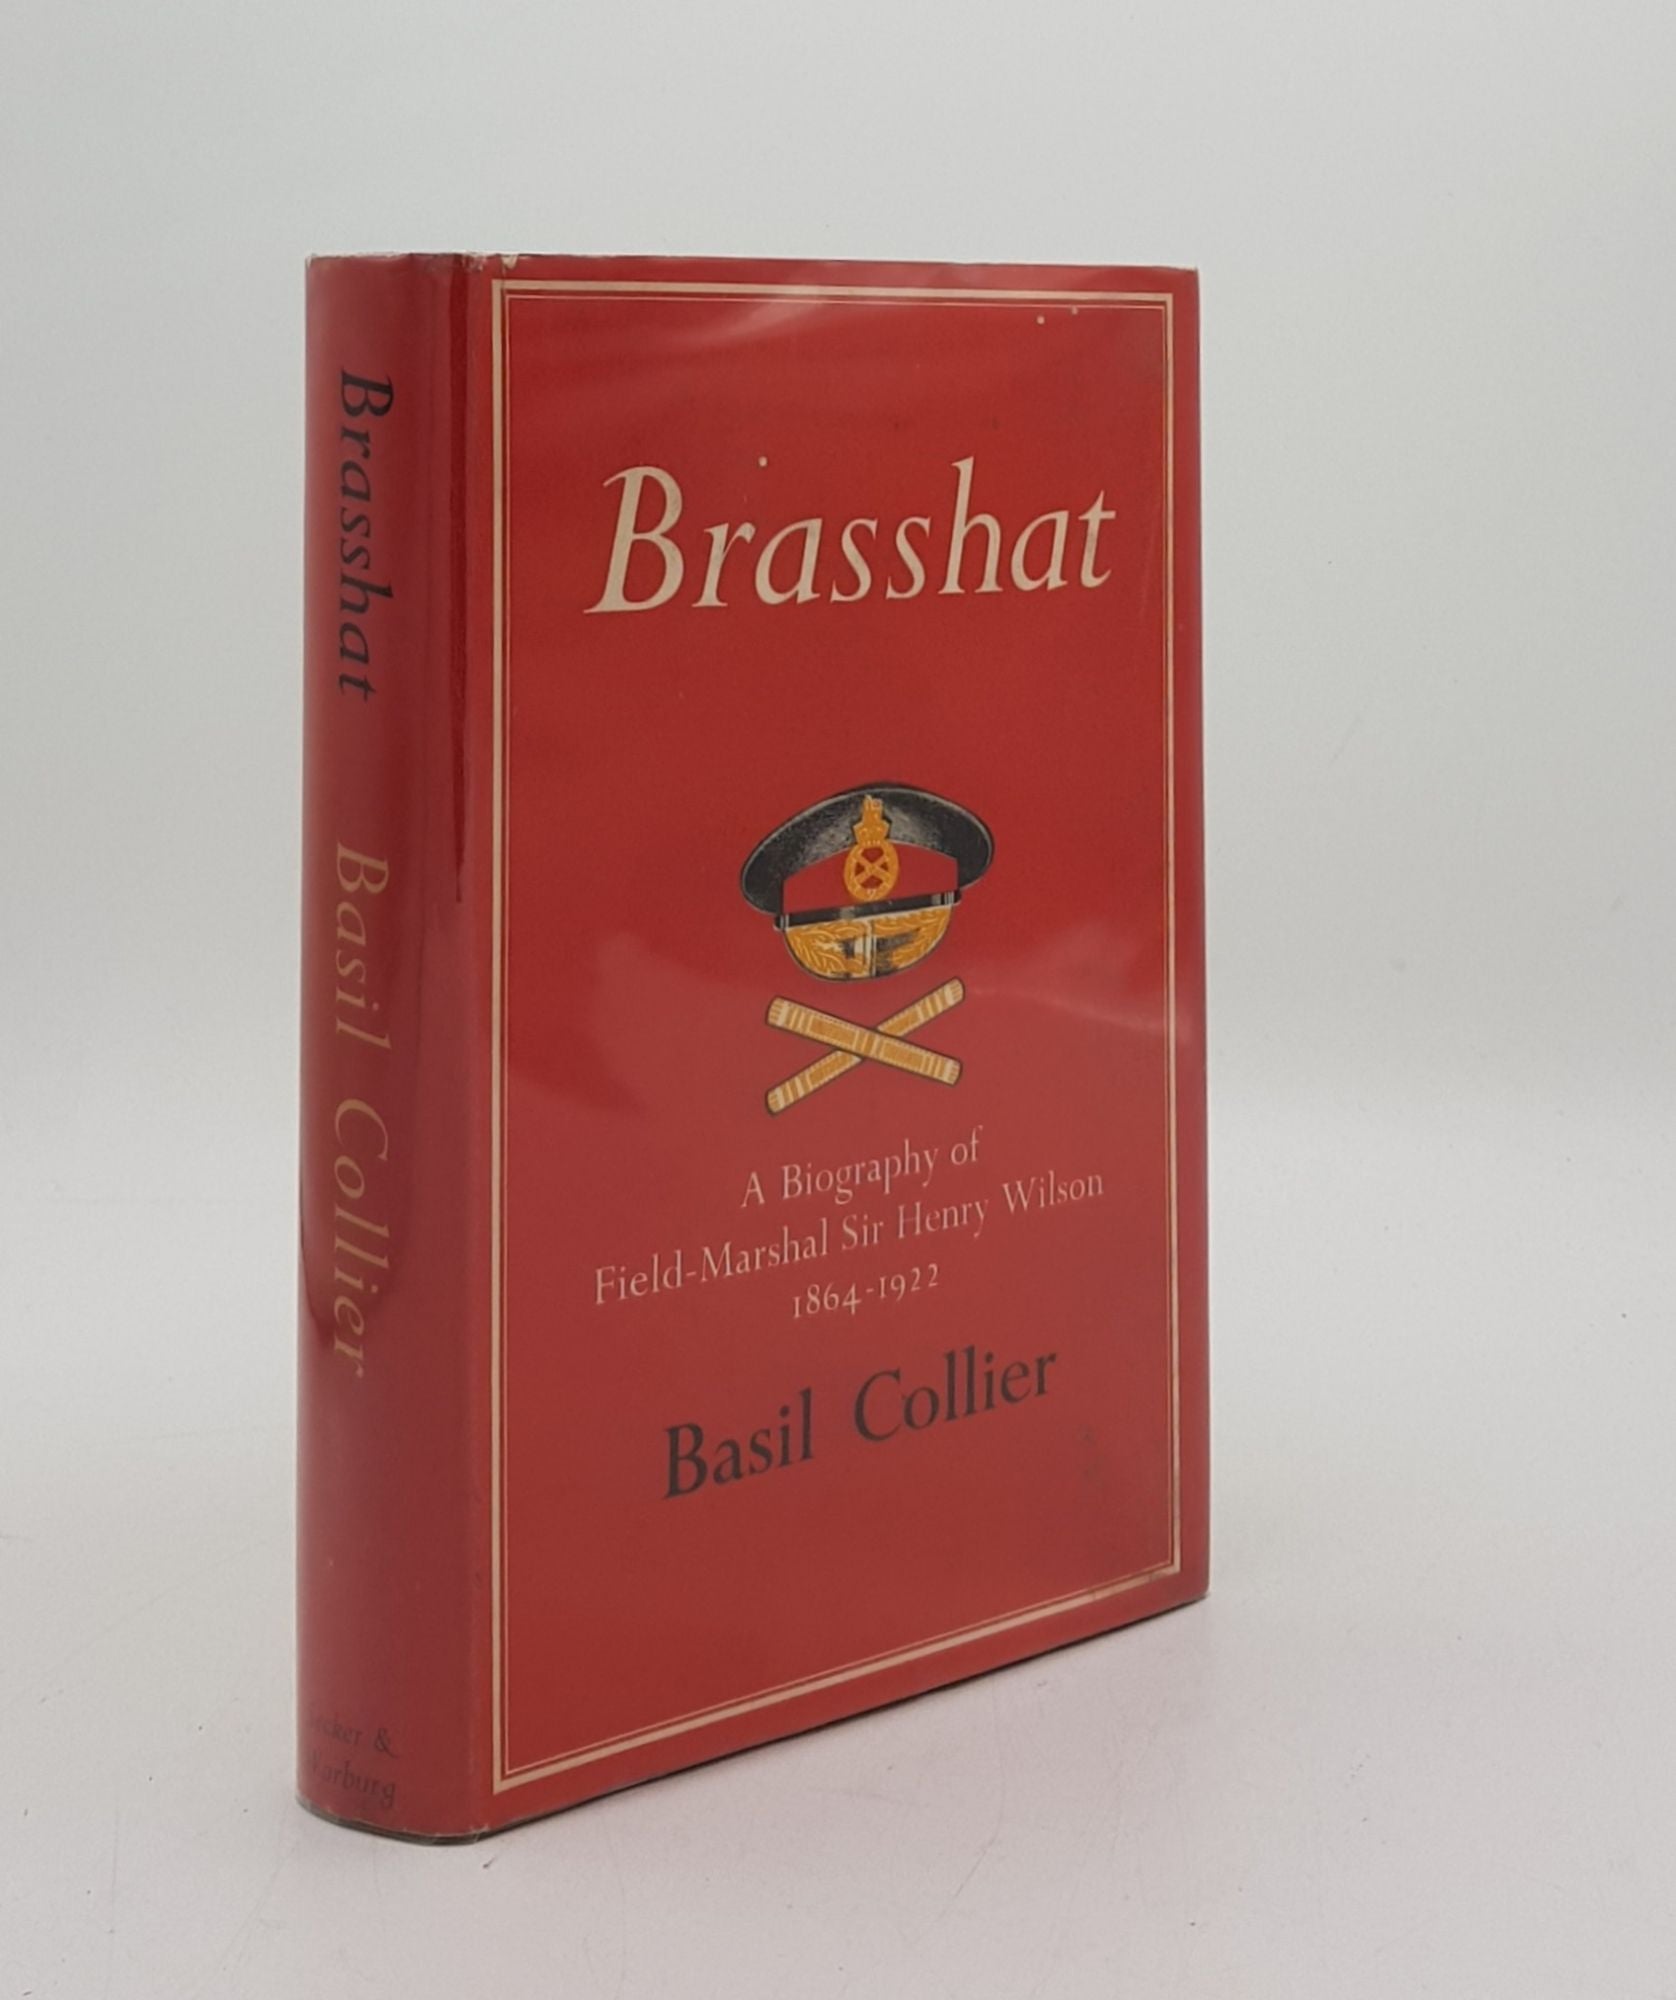 COLLIER Basil - Brasshat a Biography of Field- Marshal Sir Henry Wilson